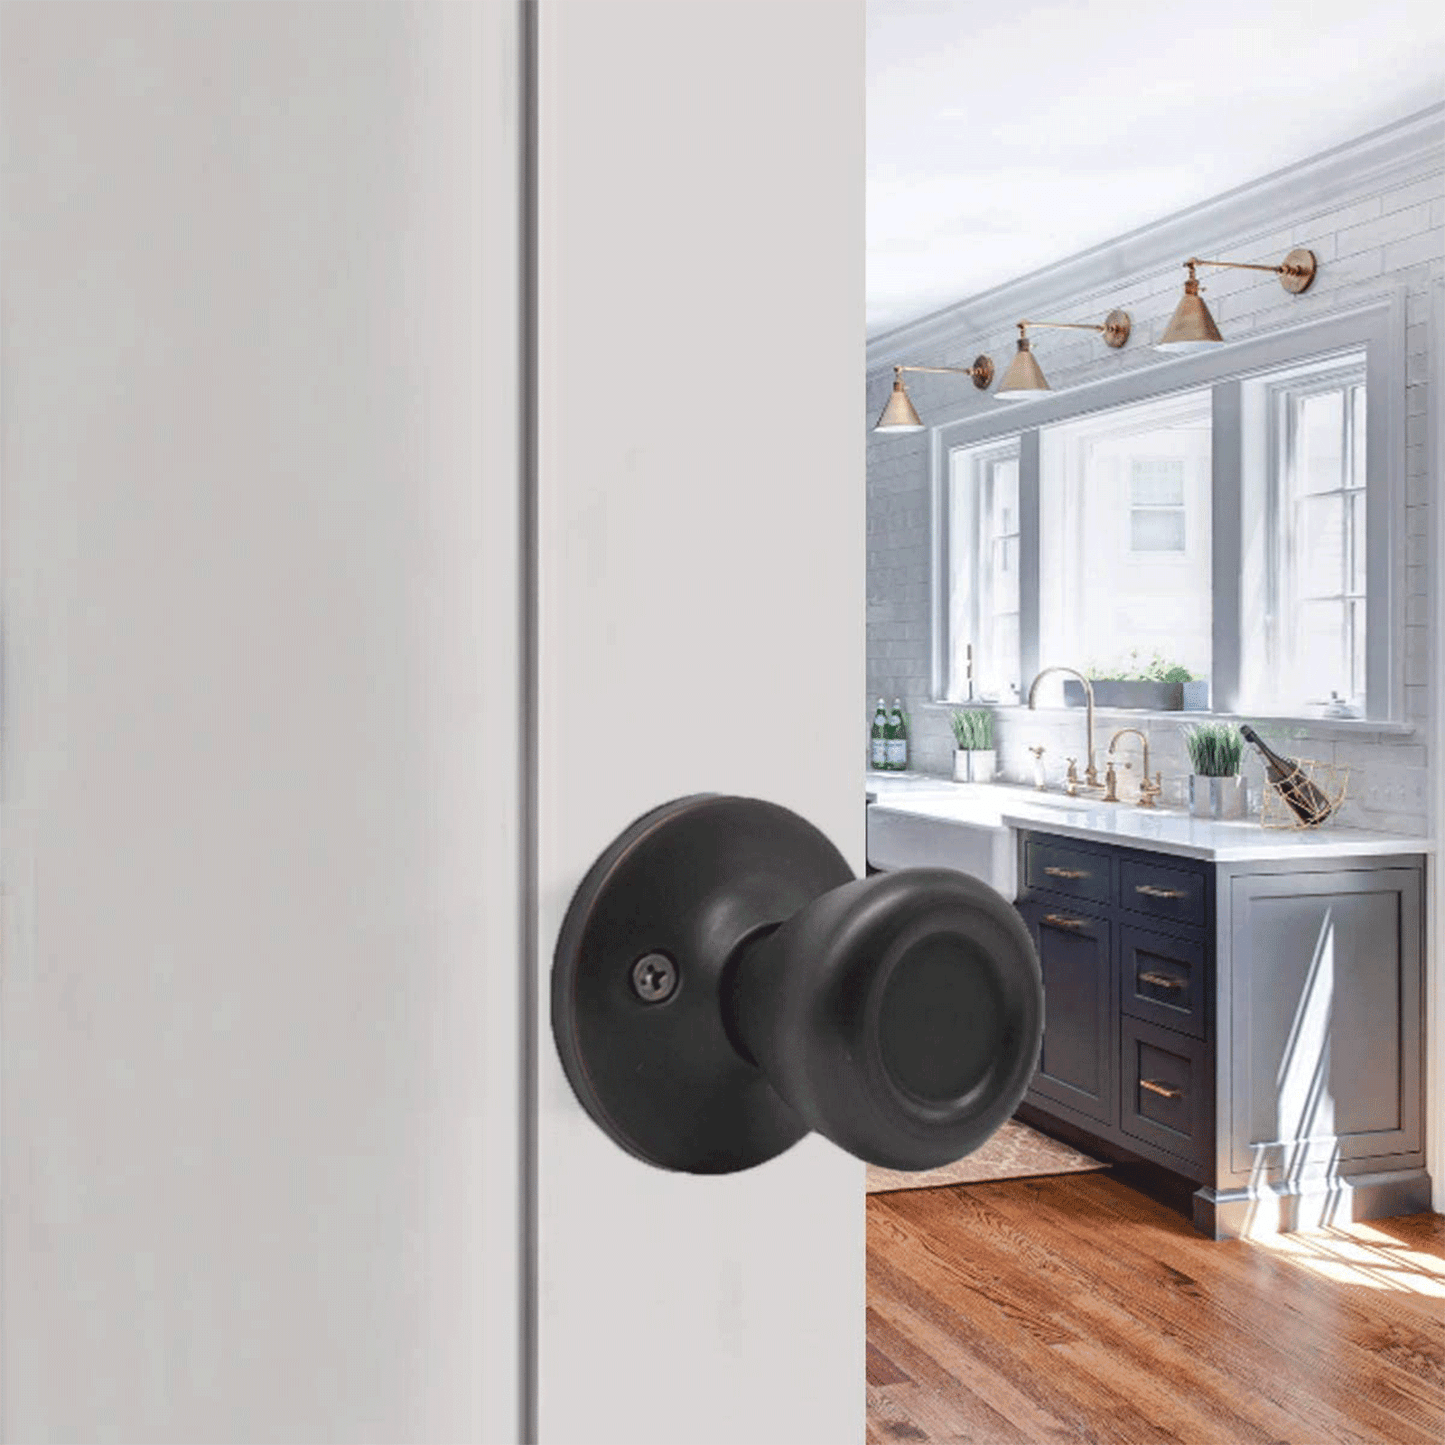 Single Connecting Rod Door Knobs Entrance/Privacy/Passage/Dummy Function Door Lock Knob, Oil Rubbed Bronze Finish - Probrico